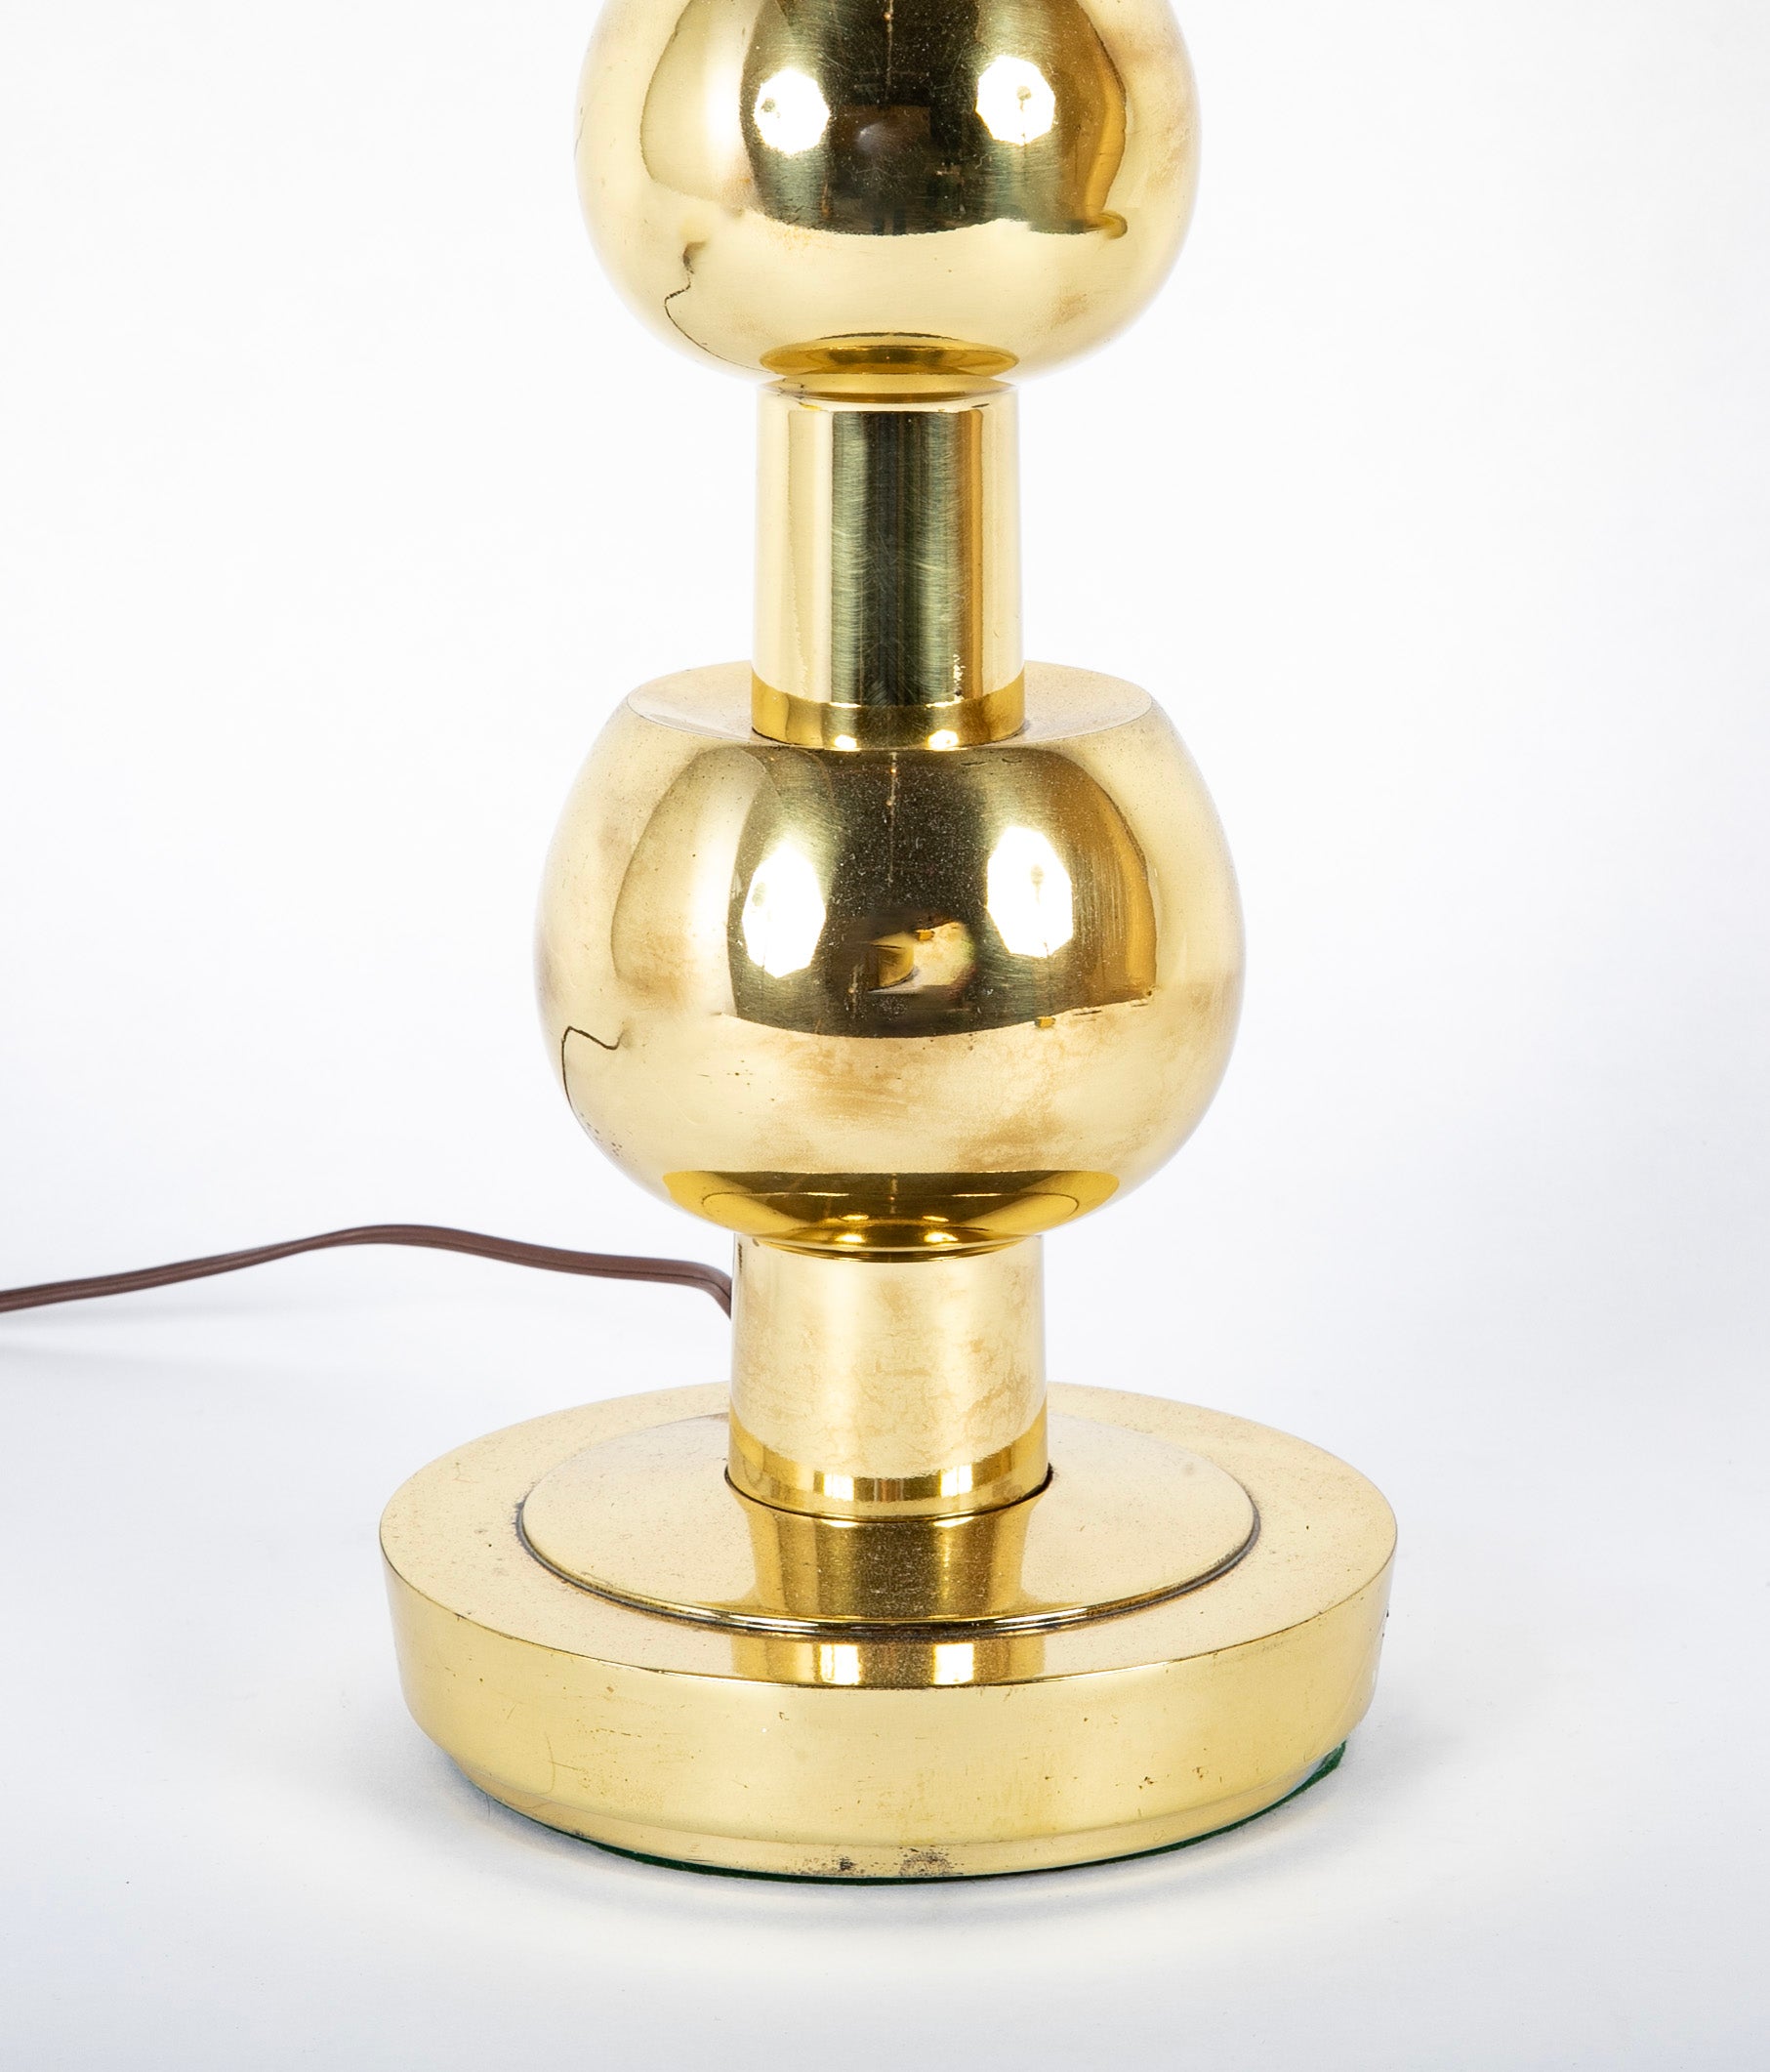 A Brass Lamp Designed by Tommi Parzinger for Stiffel – Avery